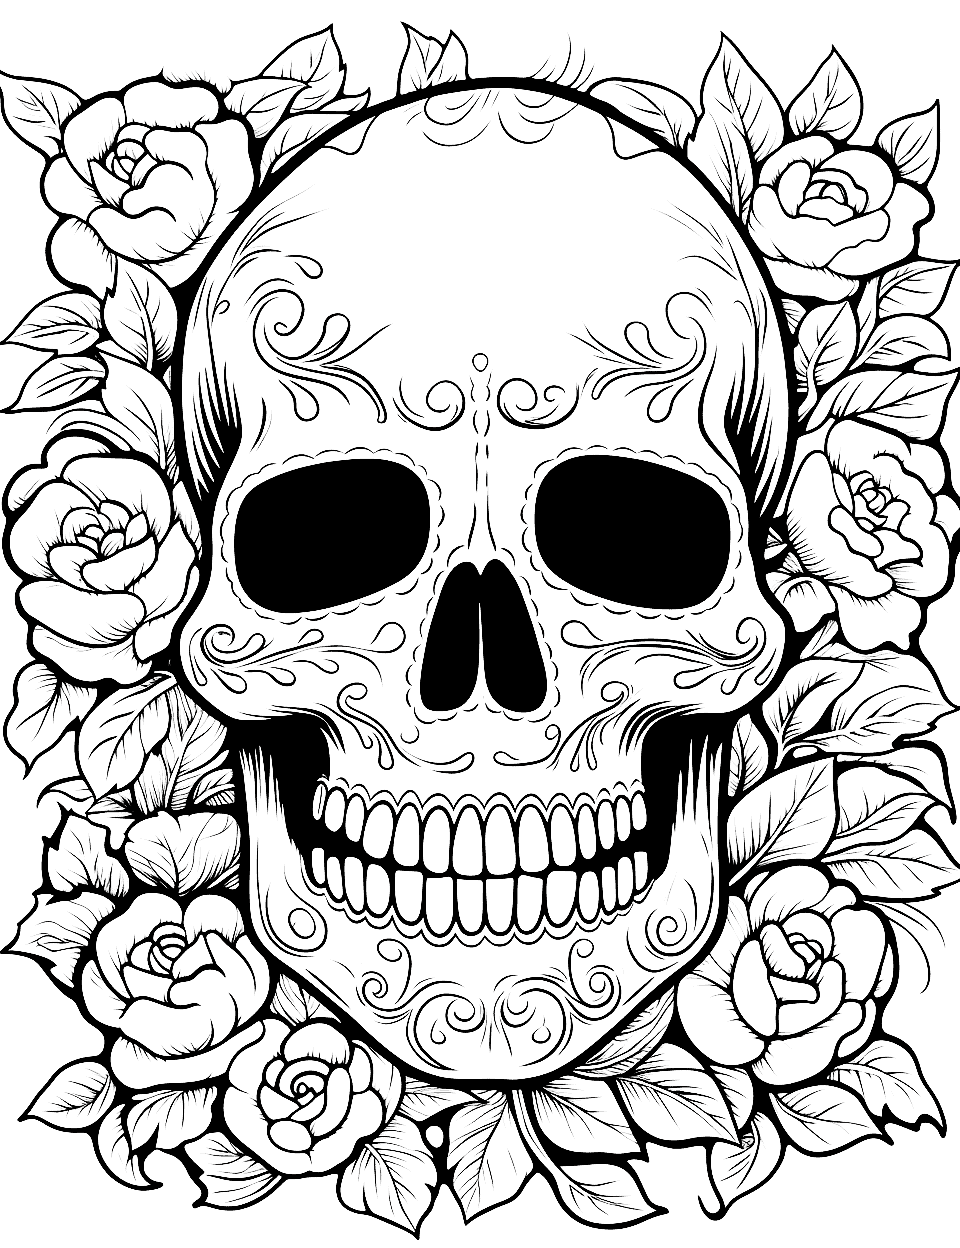 Skull Surrounded by Roses Coloring Page - A skull nestled among a bed of roses, with petals and roses gently laid all around.